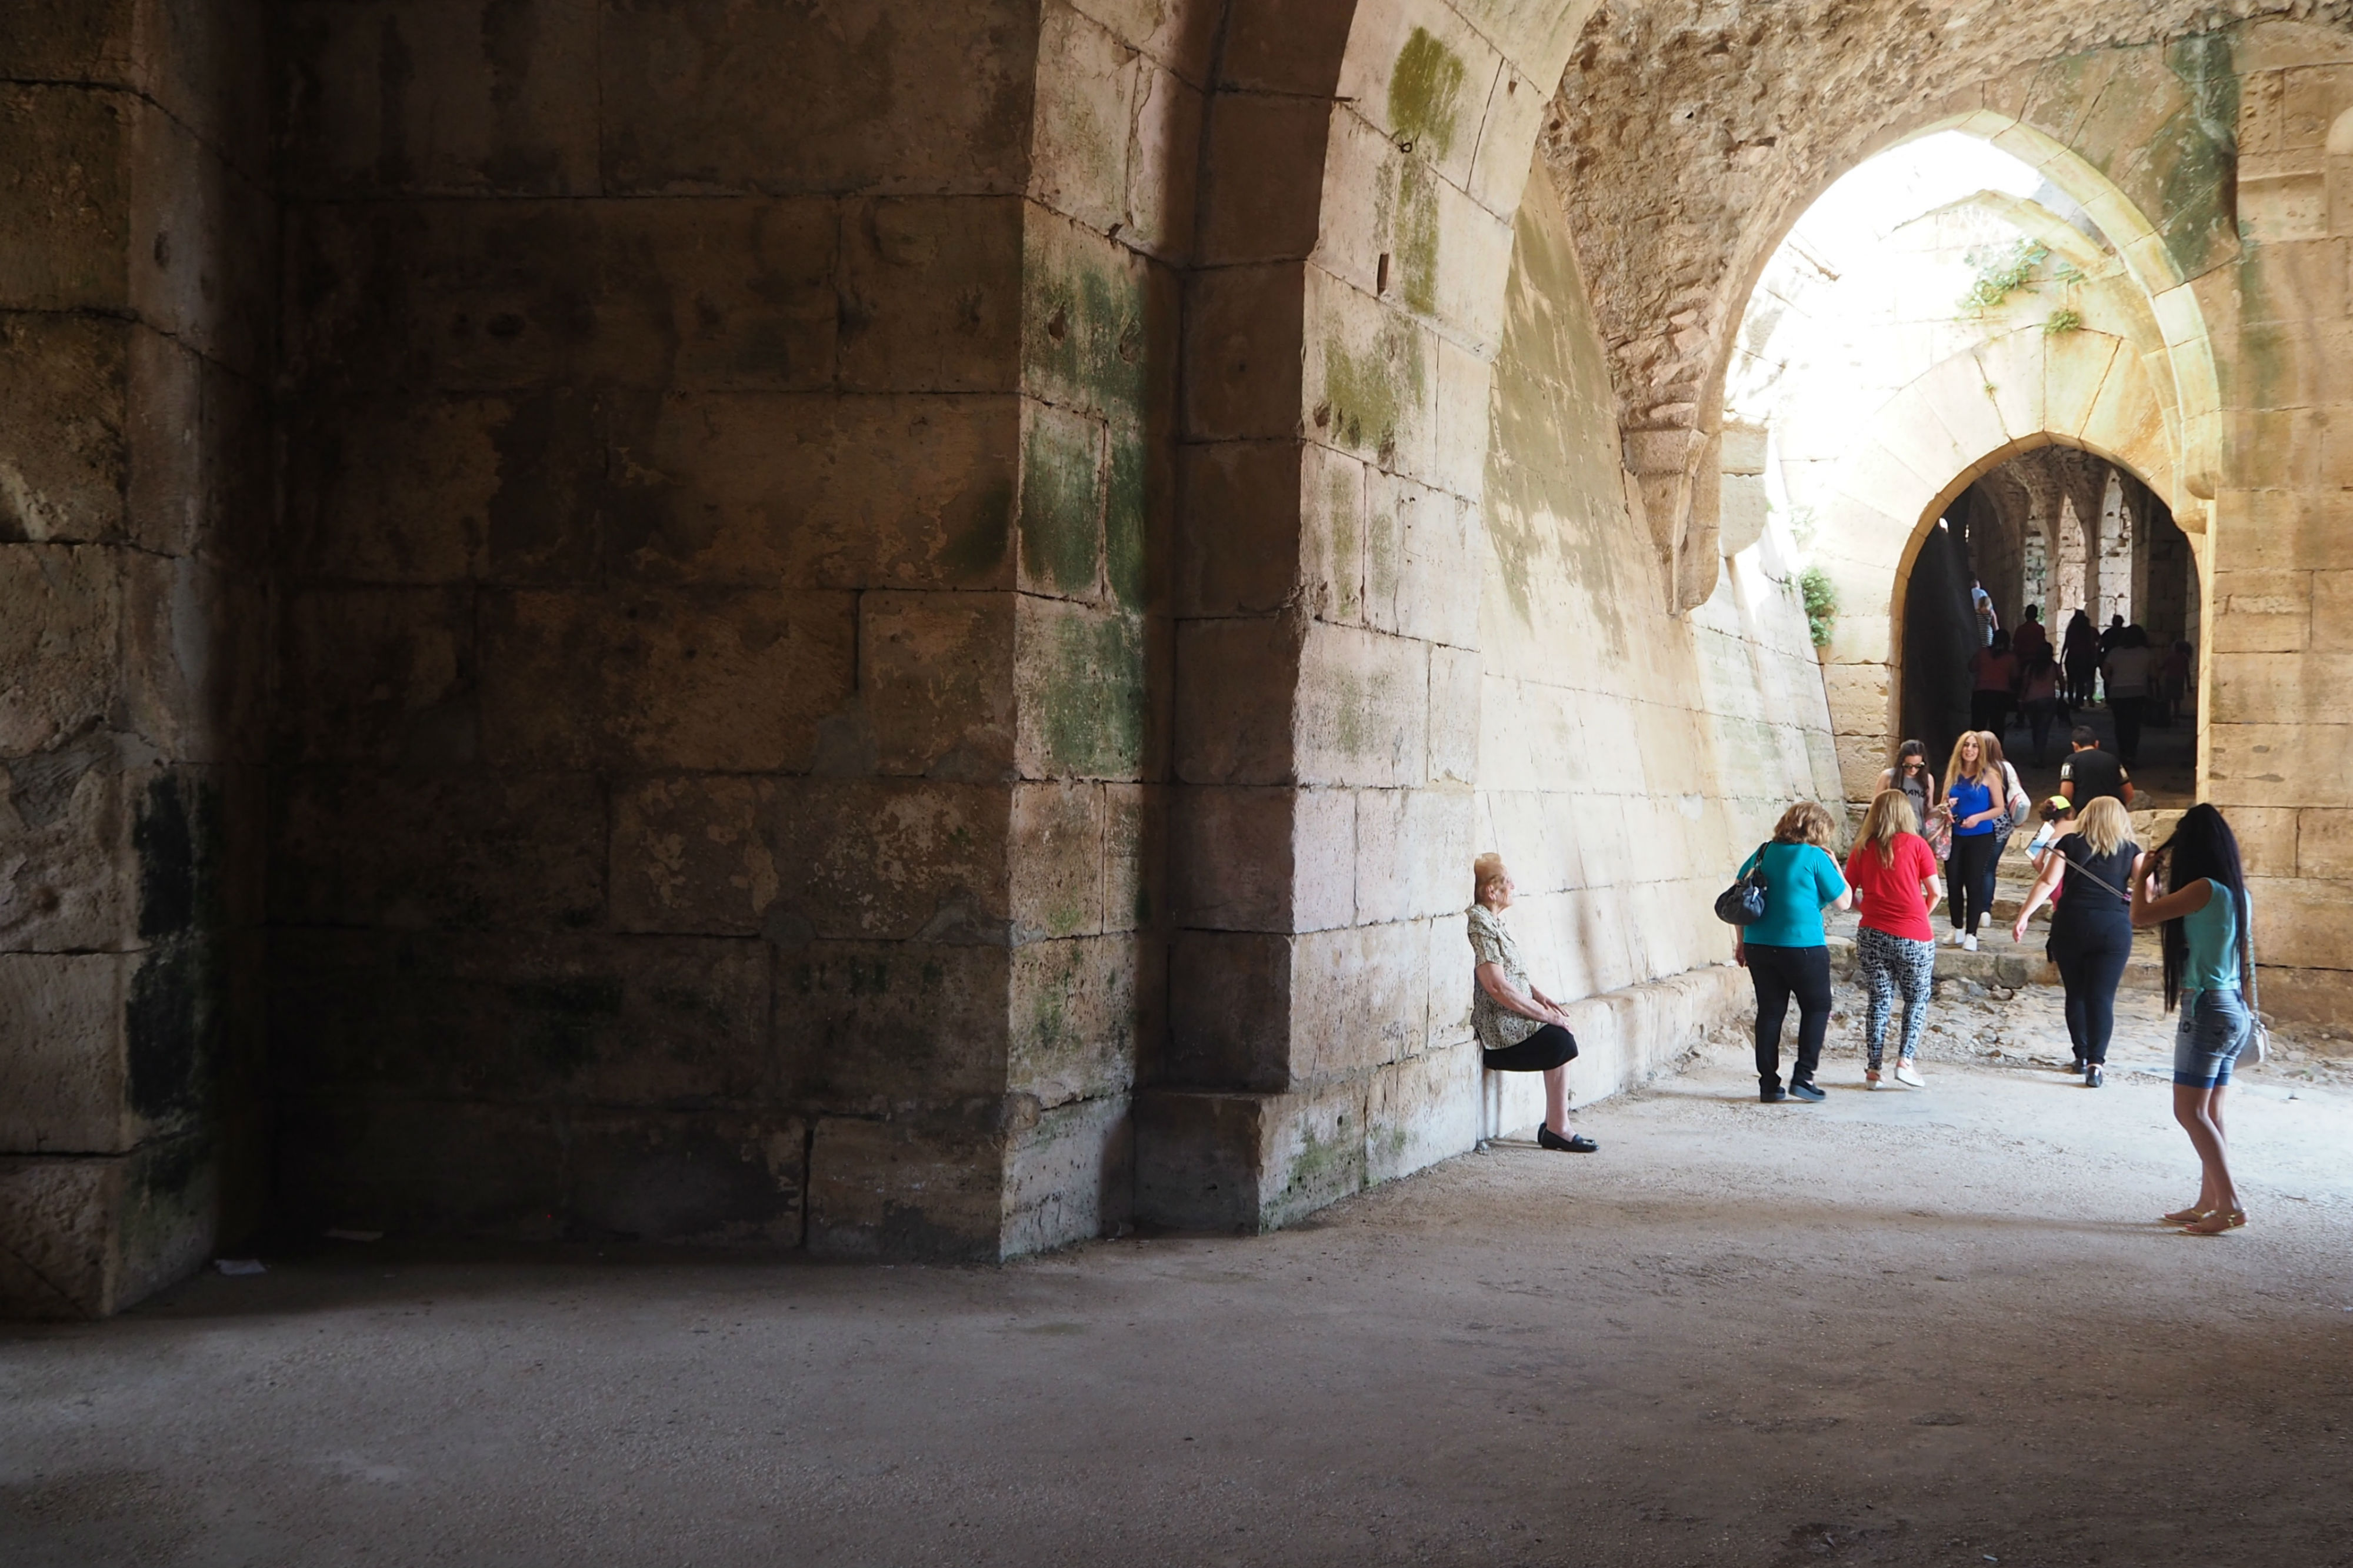 Syrian visitors are starting to return to the castle, although sections were damaged during the war (Tom Westcott/MEE)